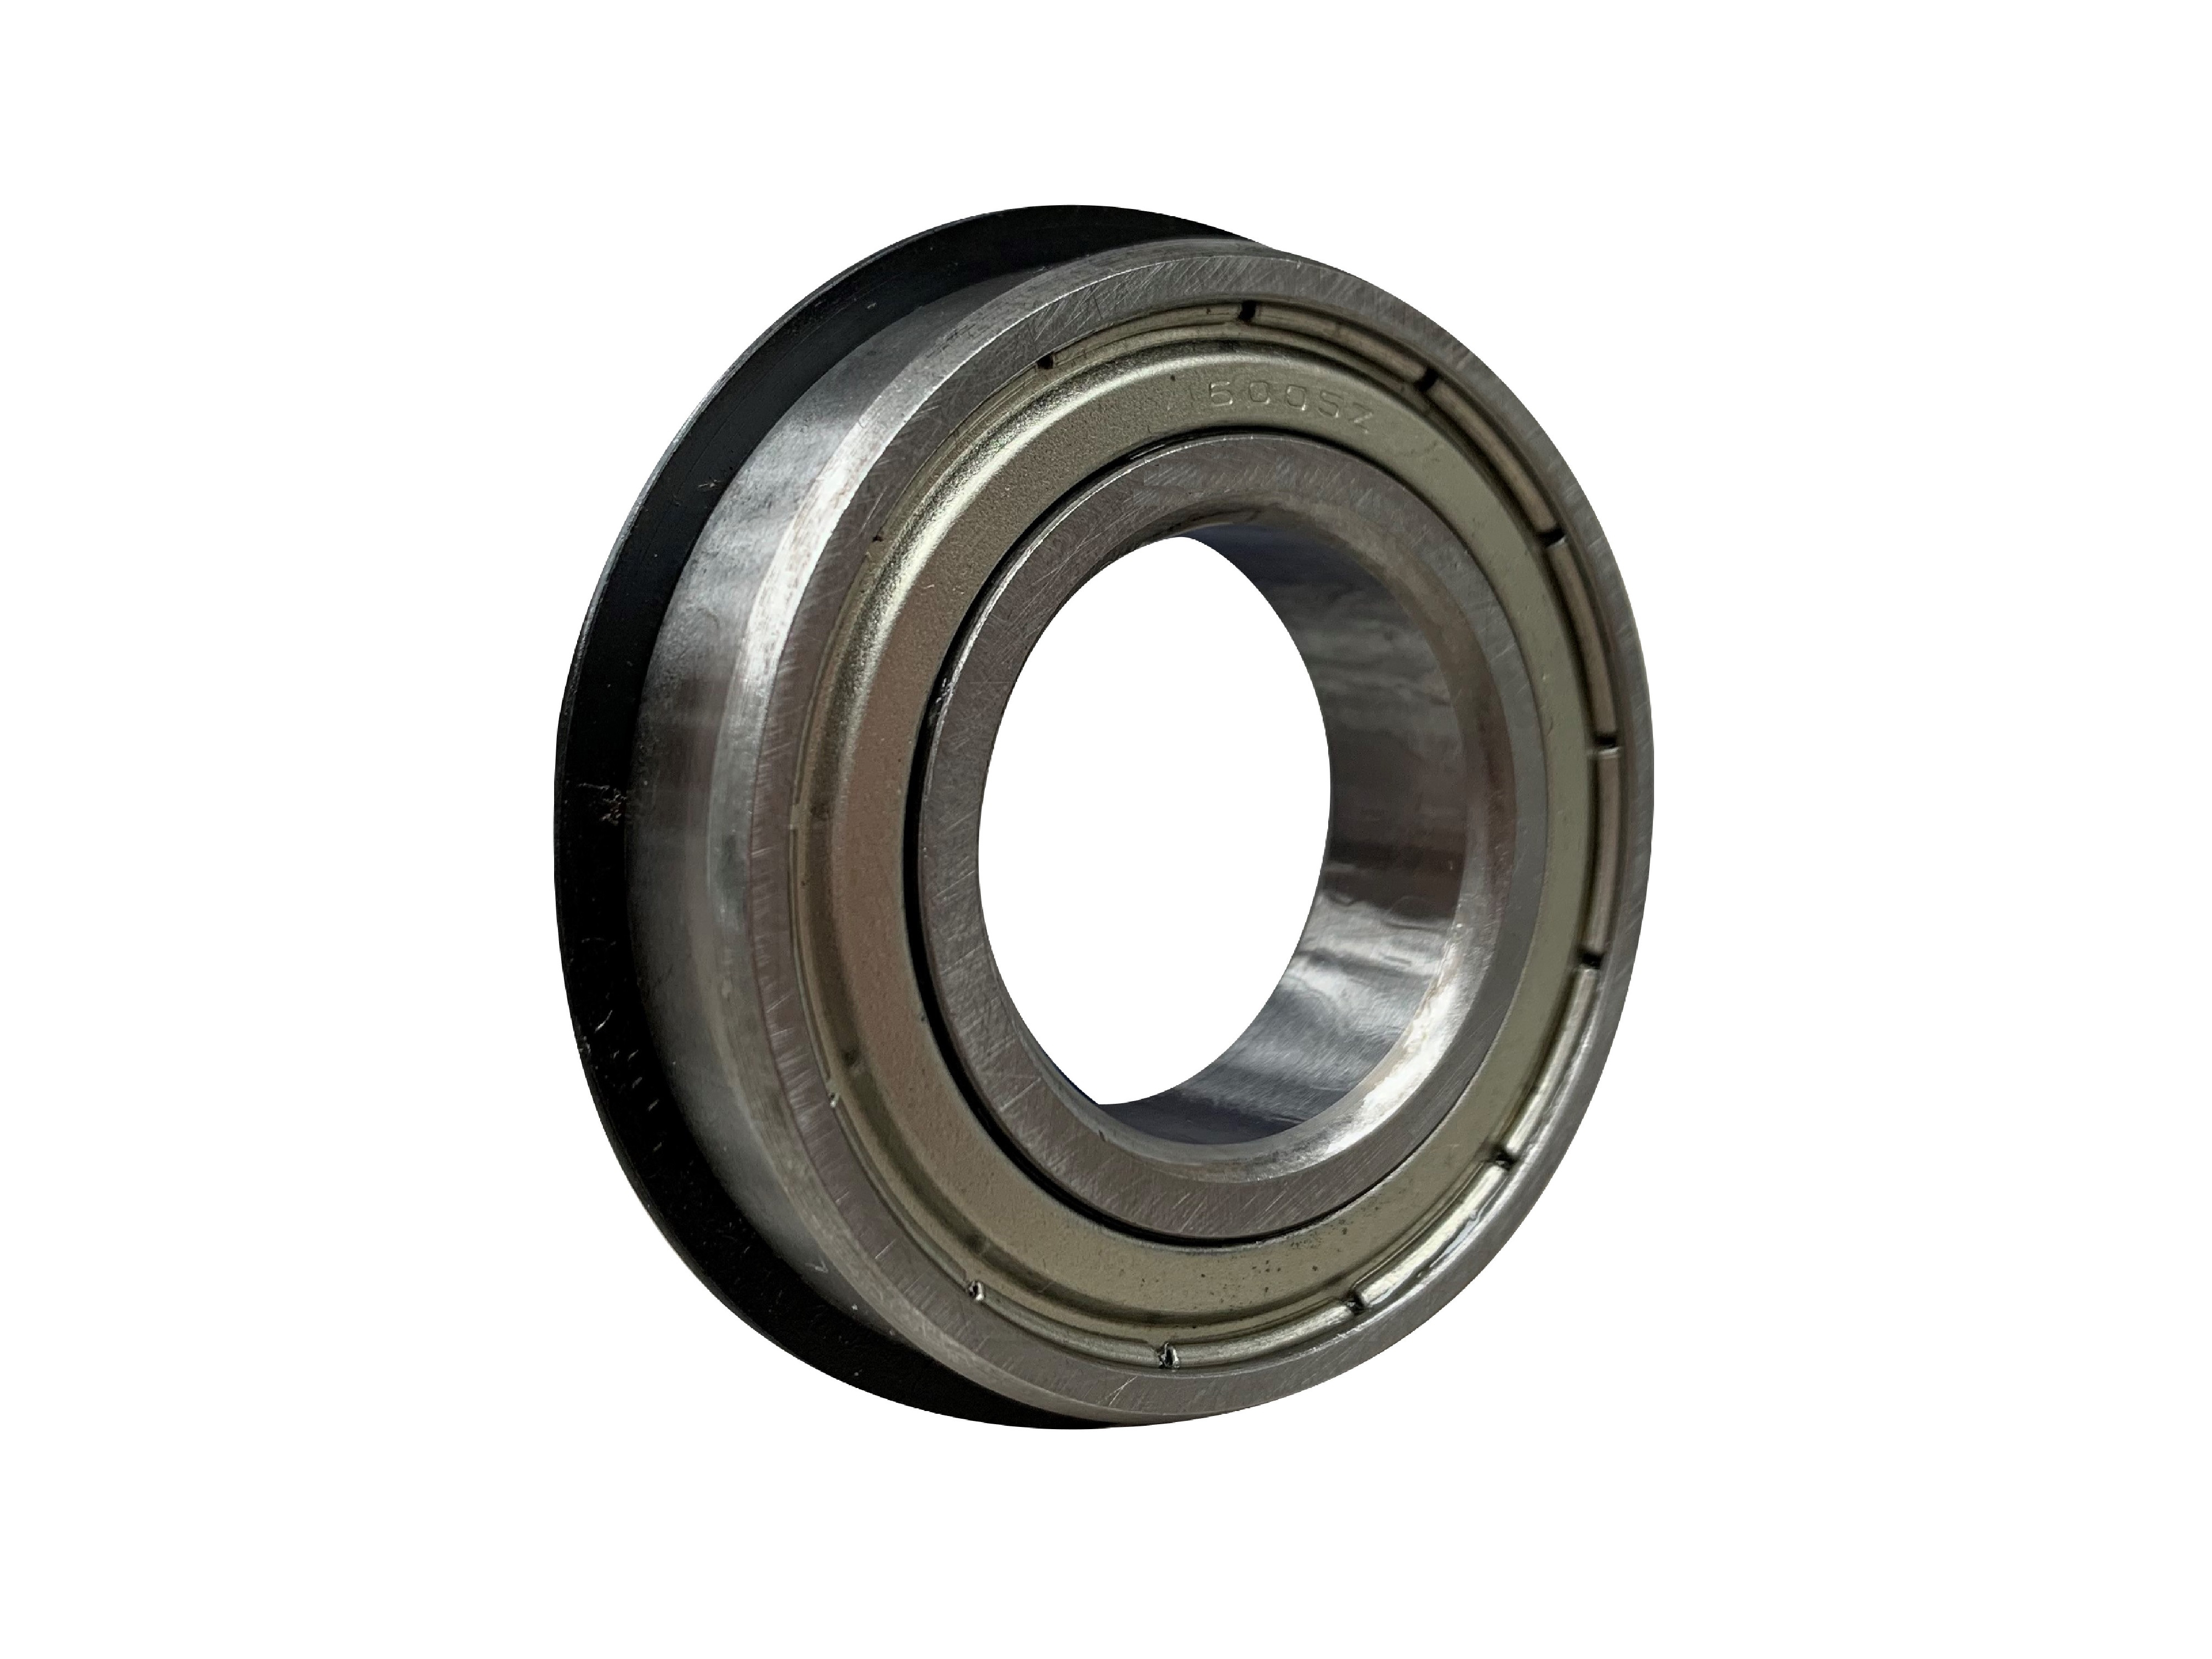 SKF 6208-2ZNR Shielded Ball Bearing With Snap Ring 40mm x 80mm x 18mm